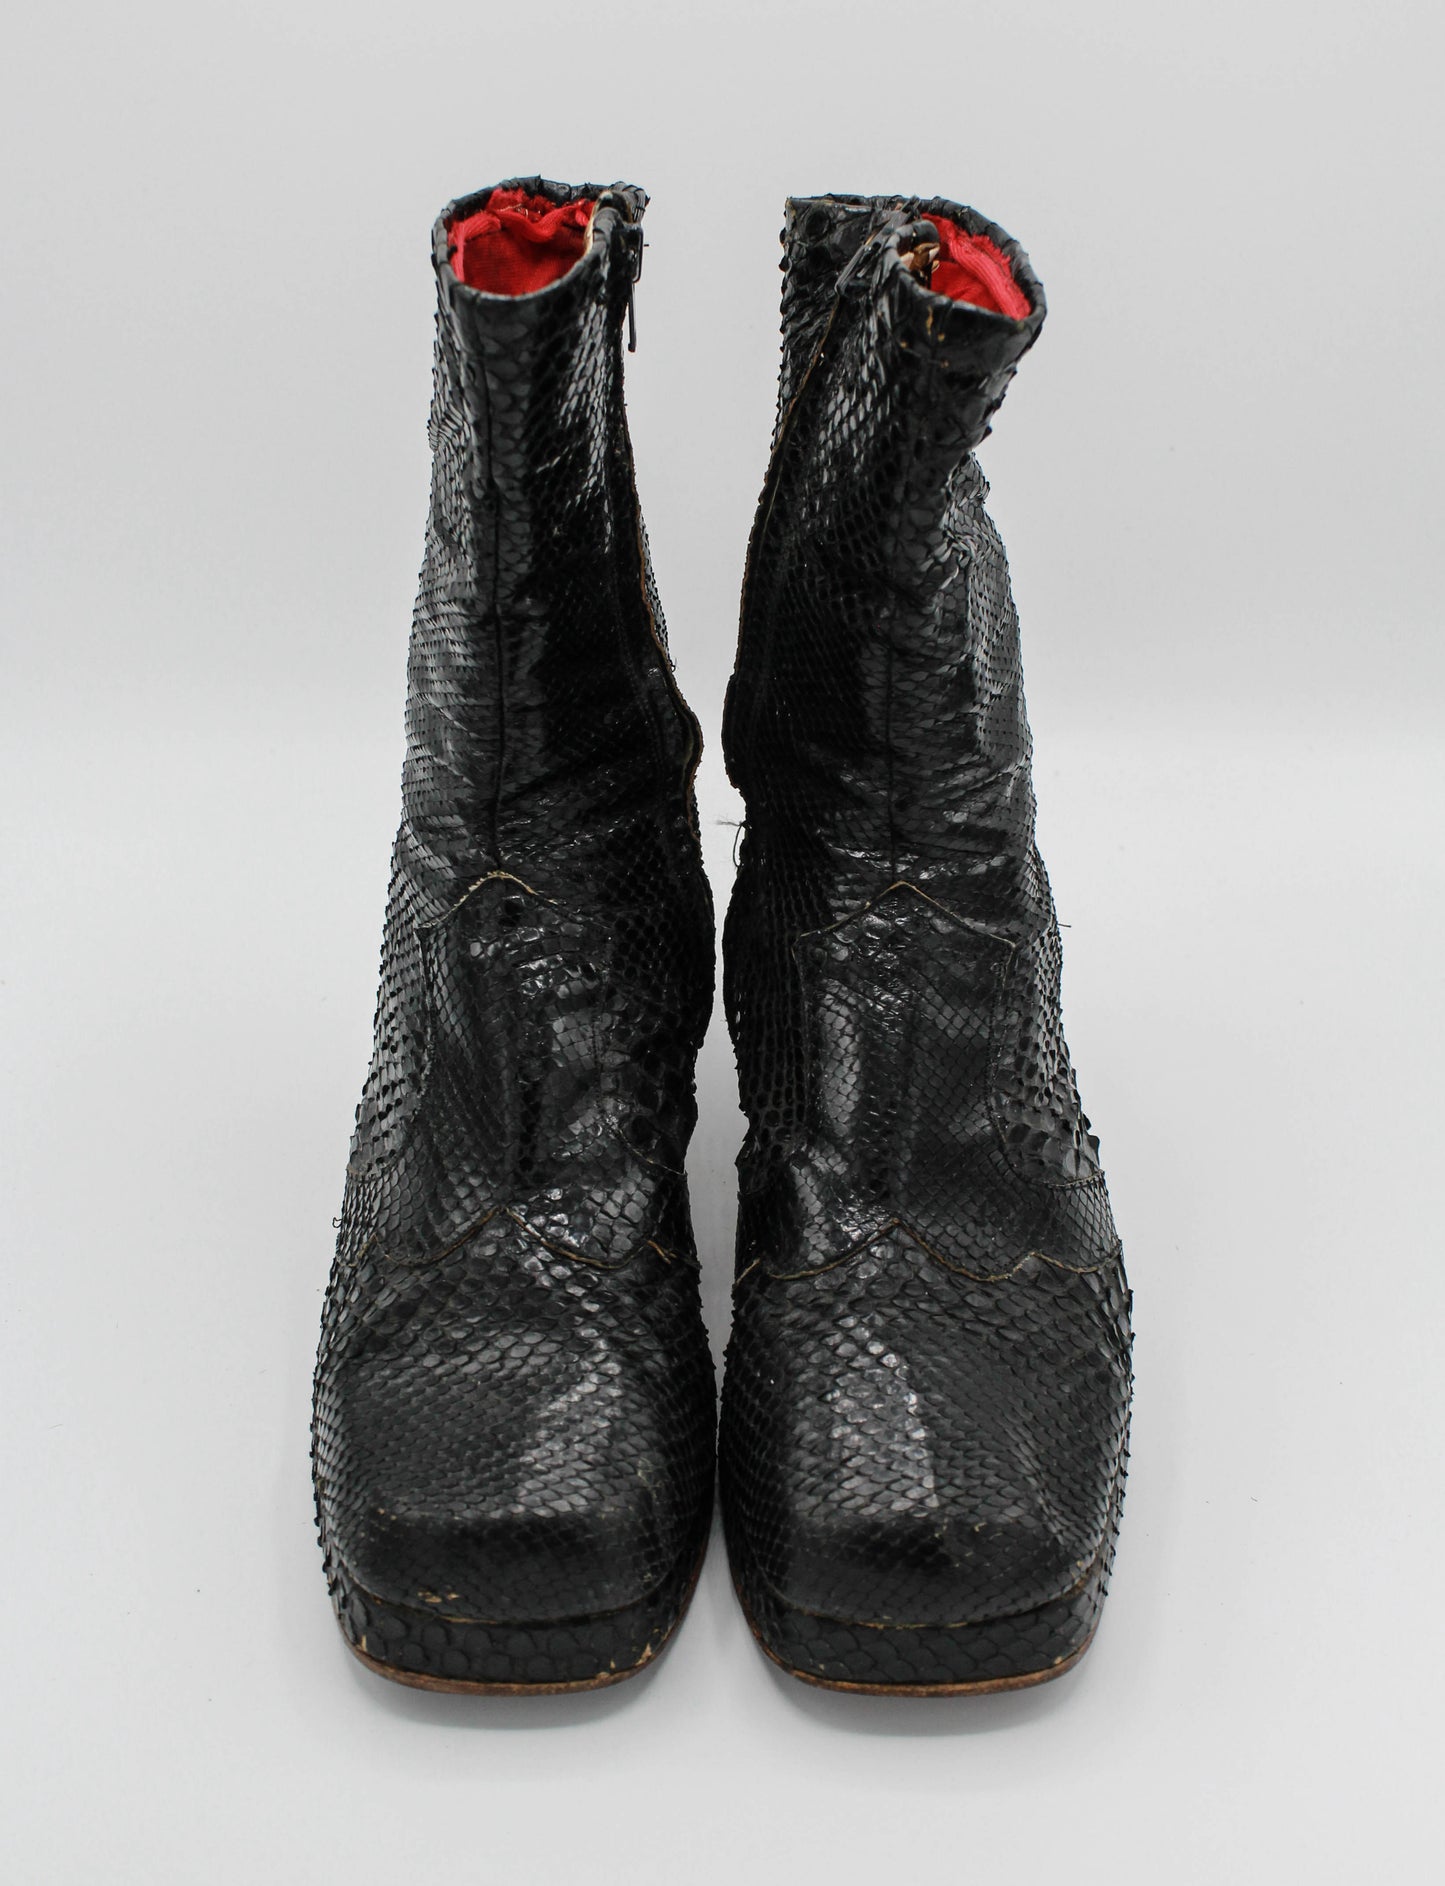 Vintage Late 60's Early 70's Granny Takes A Trip Black Snakeskin Platform Boots - M8.5/W10.5